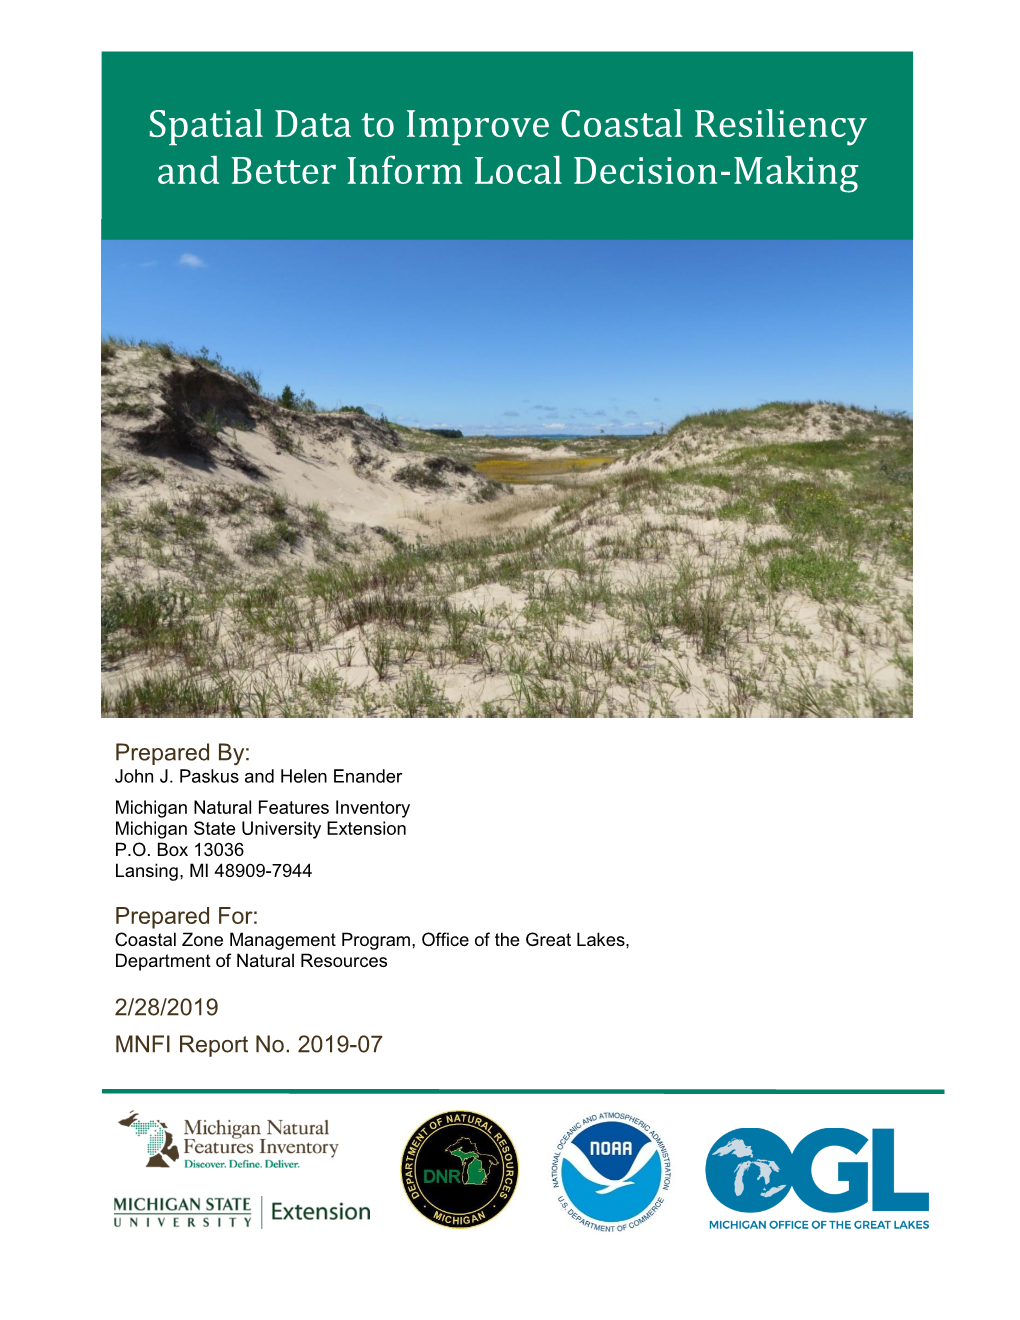 Spatial Data to Improve Coastal Resiliency and Better Inform Local Decision-Making